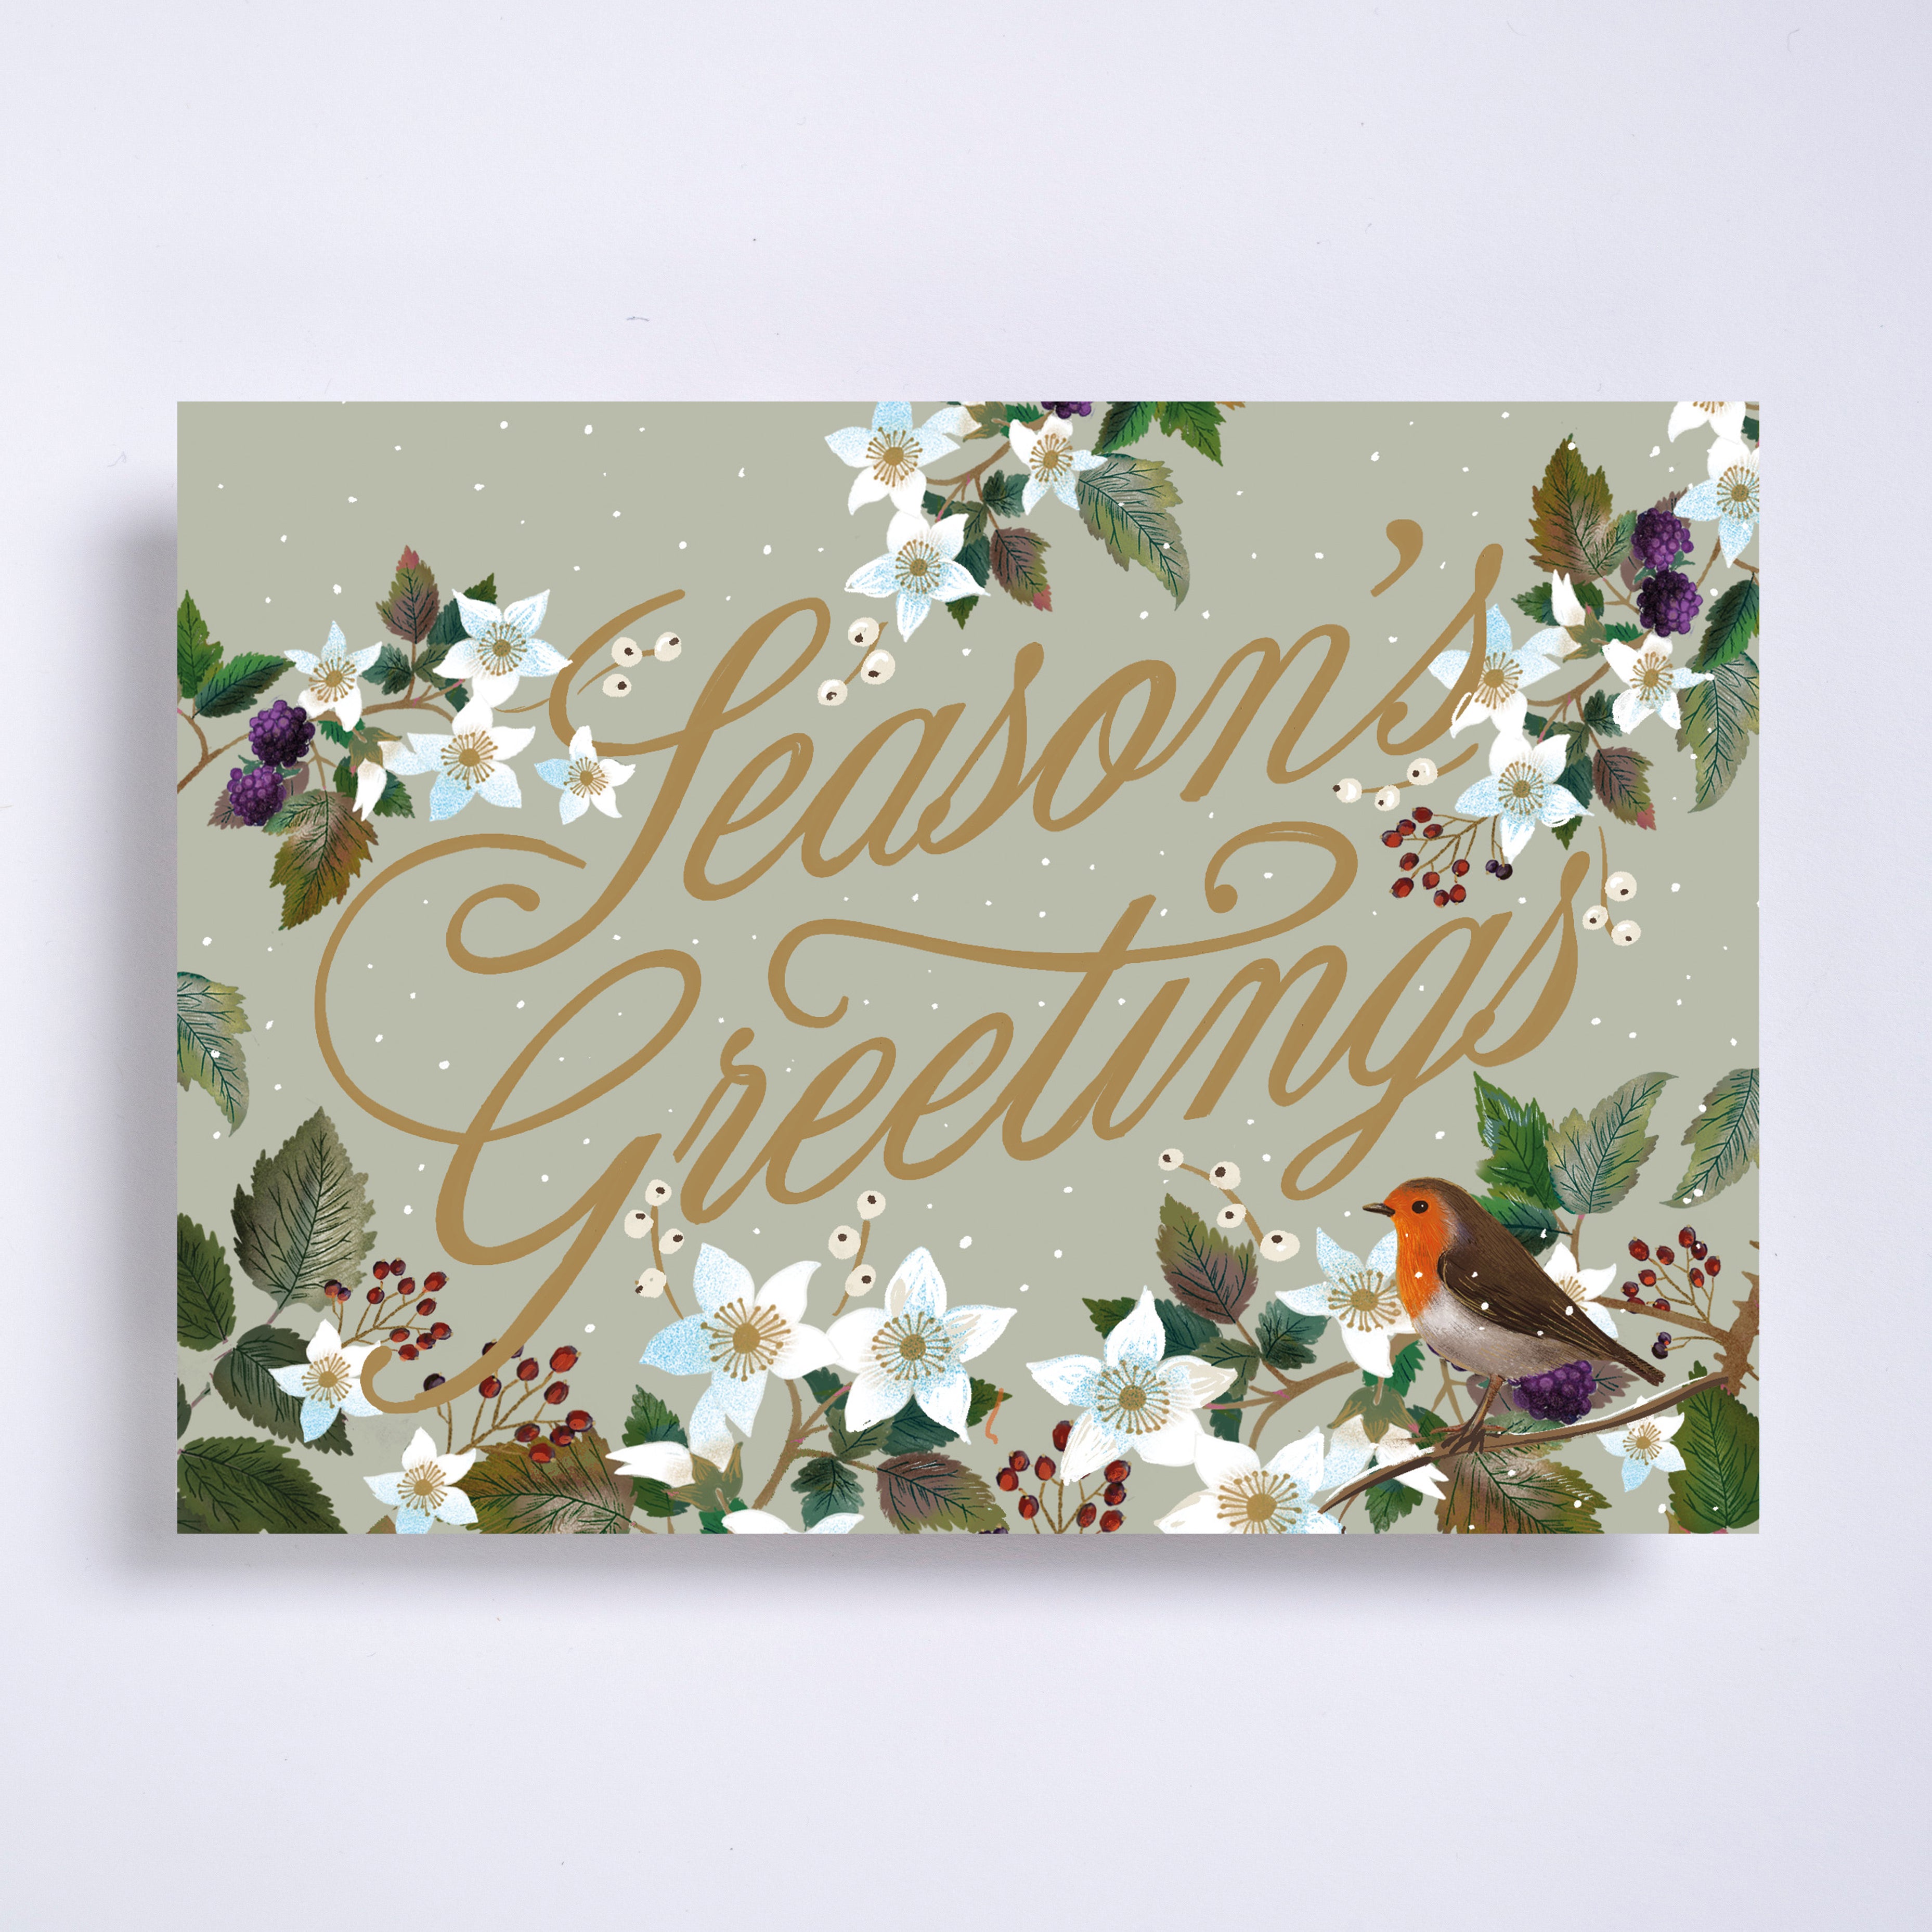 Robin greetings - pack of 10 charity Christmas cards with envelopes